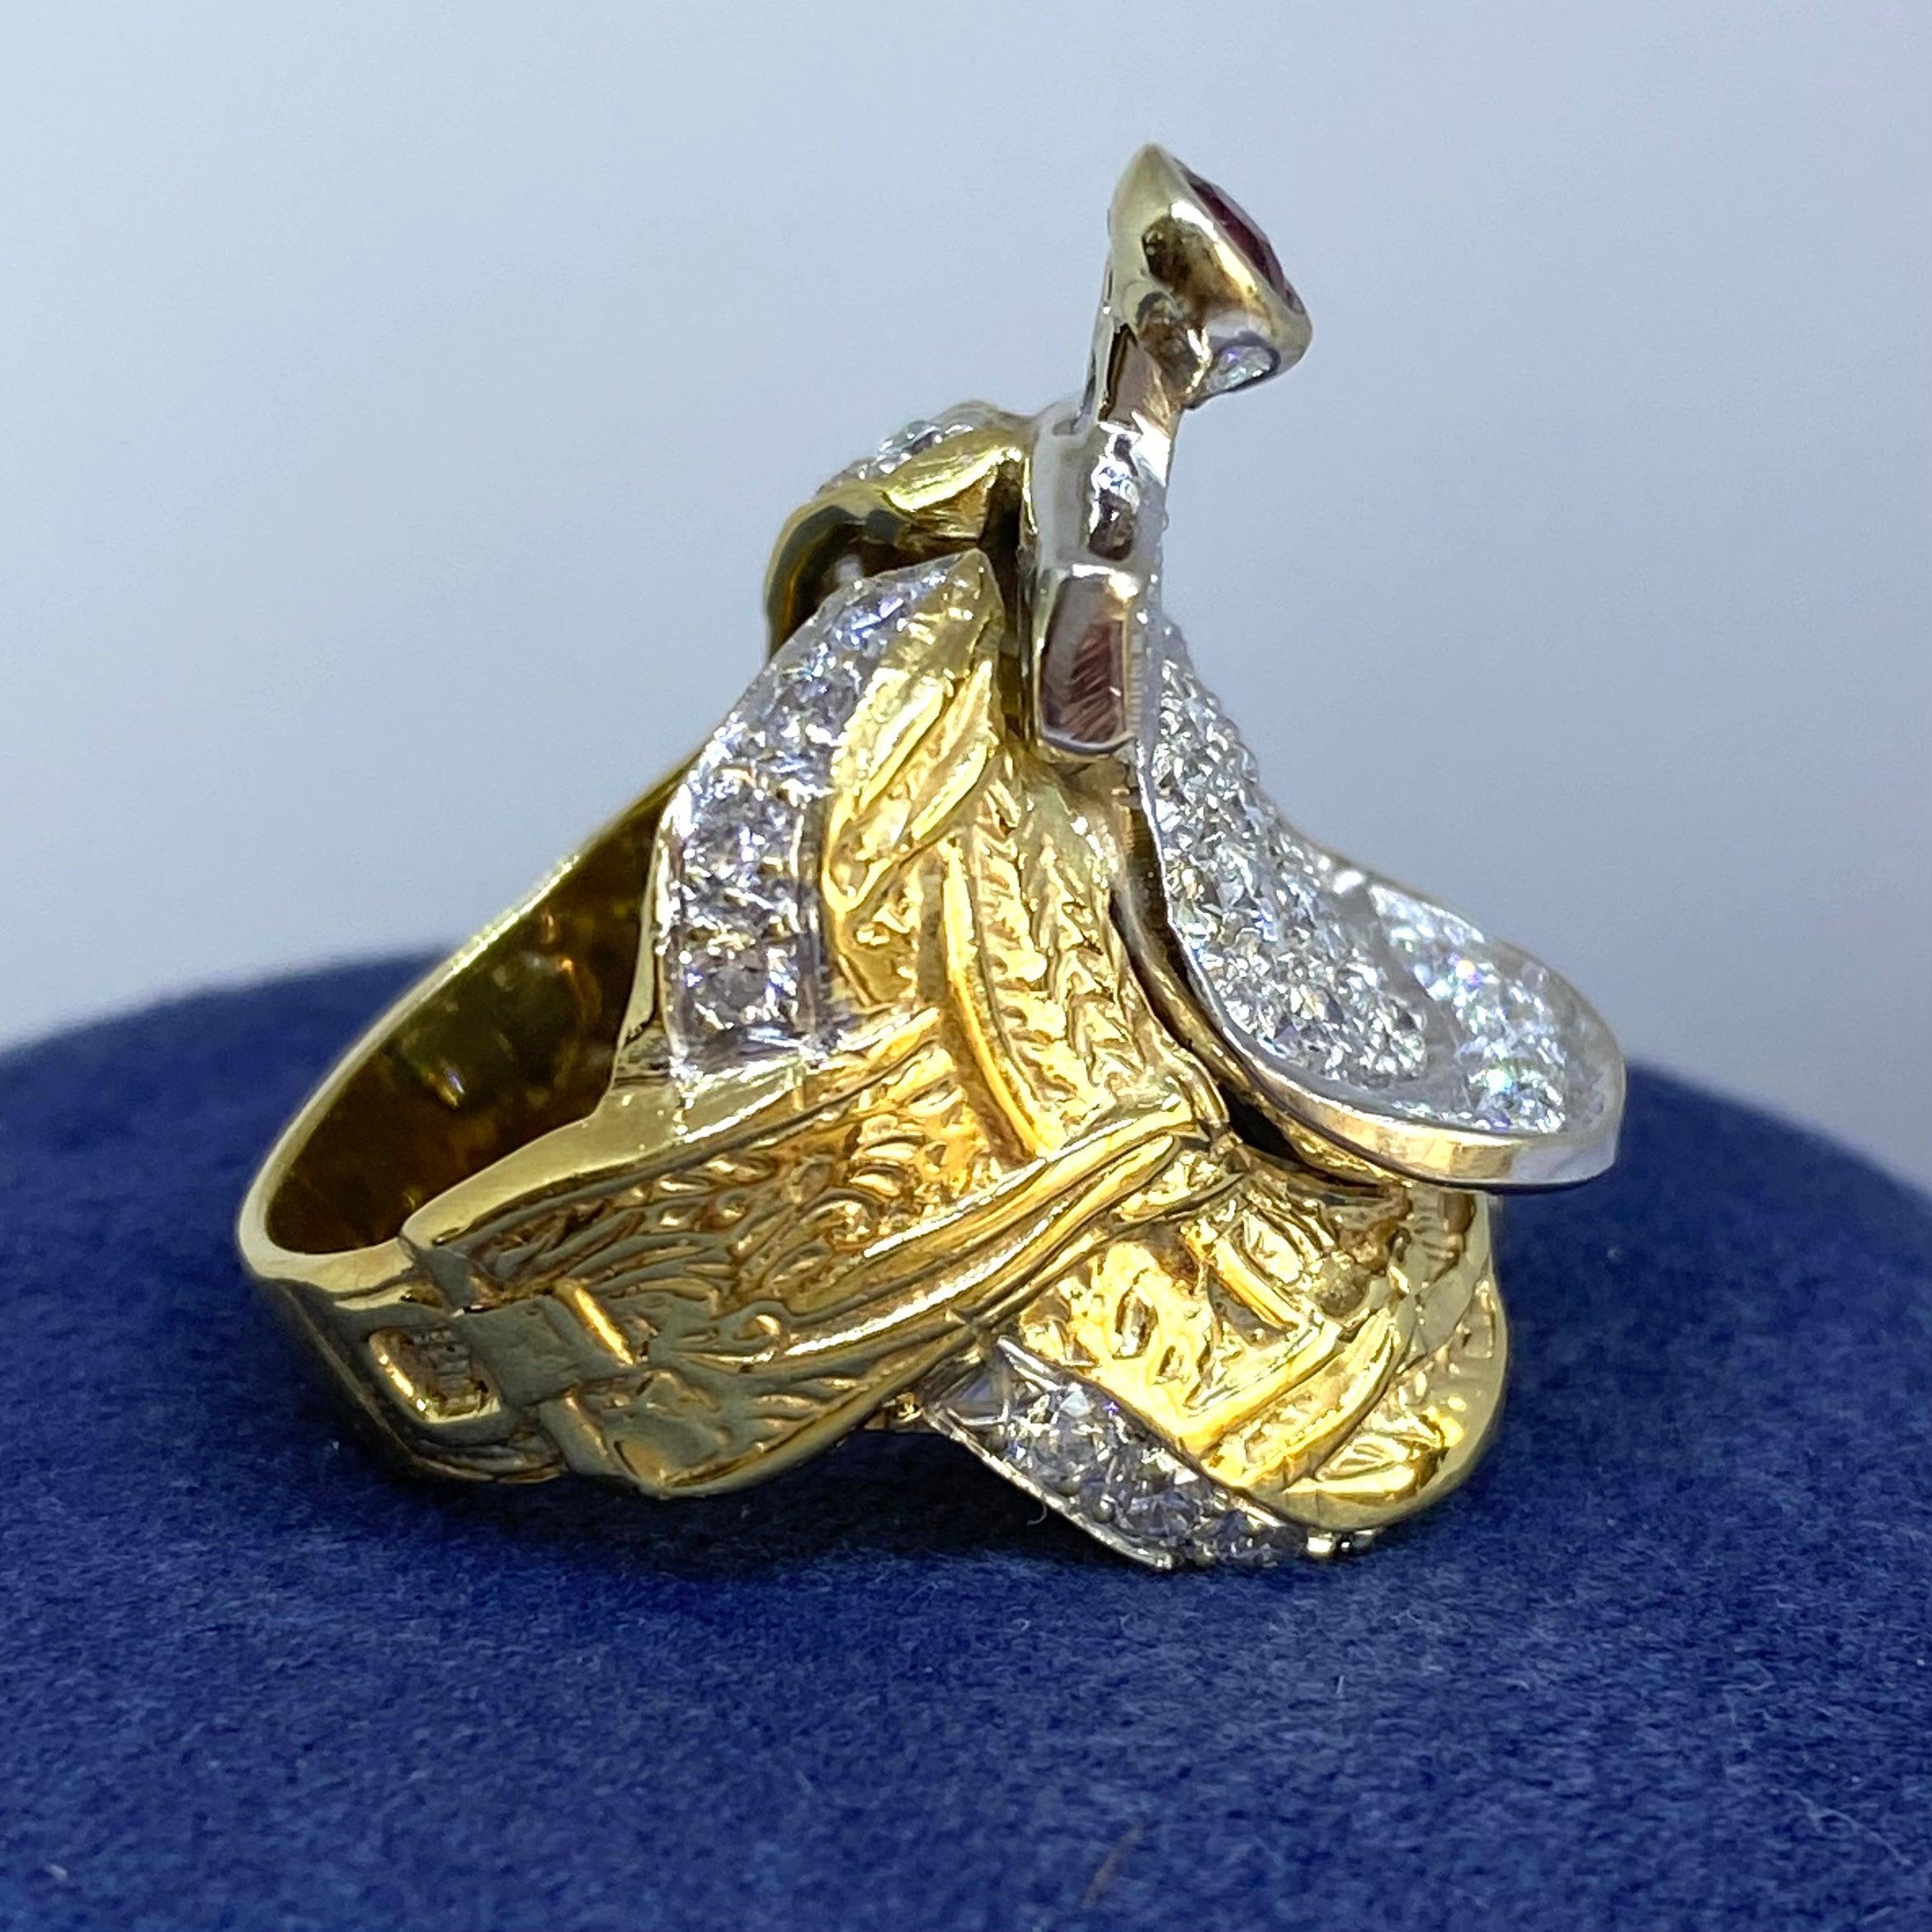 One of a kind hand made 18K gold saddle ring, featuring a white gold diamond set seat, a horn with a bezel set ruby on top and hand finished yellow gold seat with diamonds around the edges. Amazing piece of work of art.
44 round brilliant cut